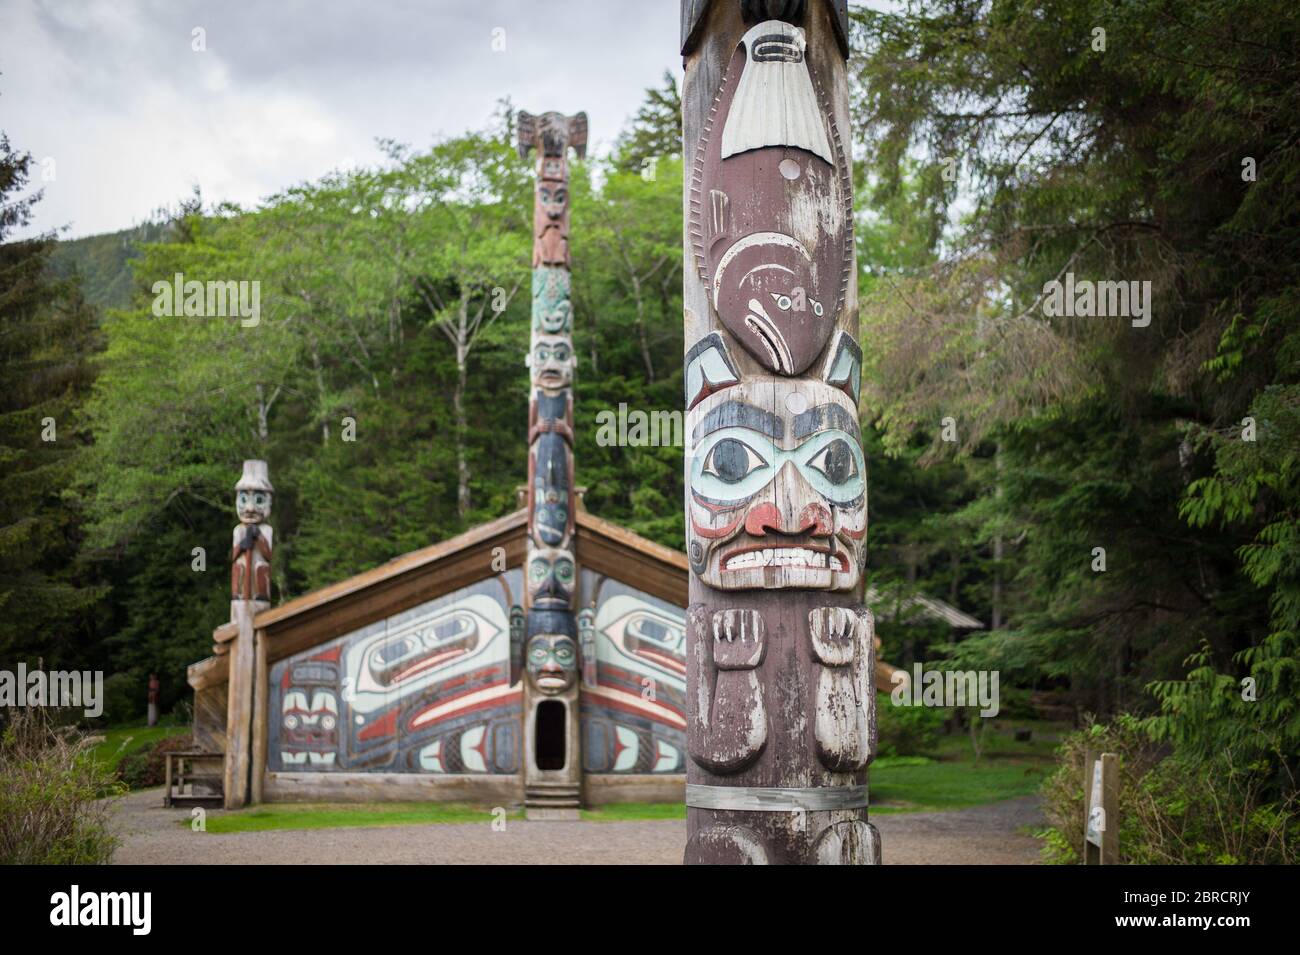 Totem Bight State Historical Park, Ketchikan, Alaska, USA, displays a collection of Native American totem poles and the Wandering Raven clan house. Stock Photo